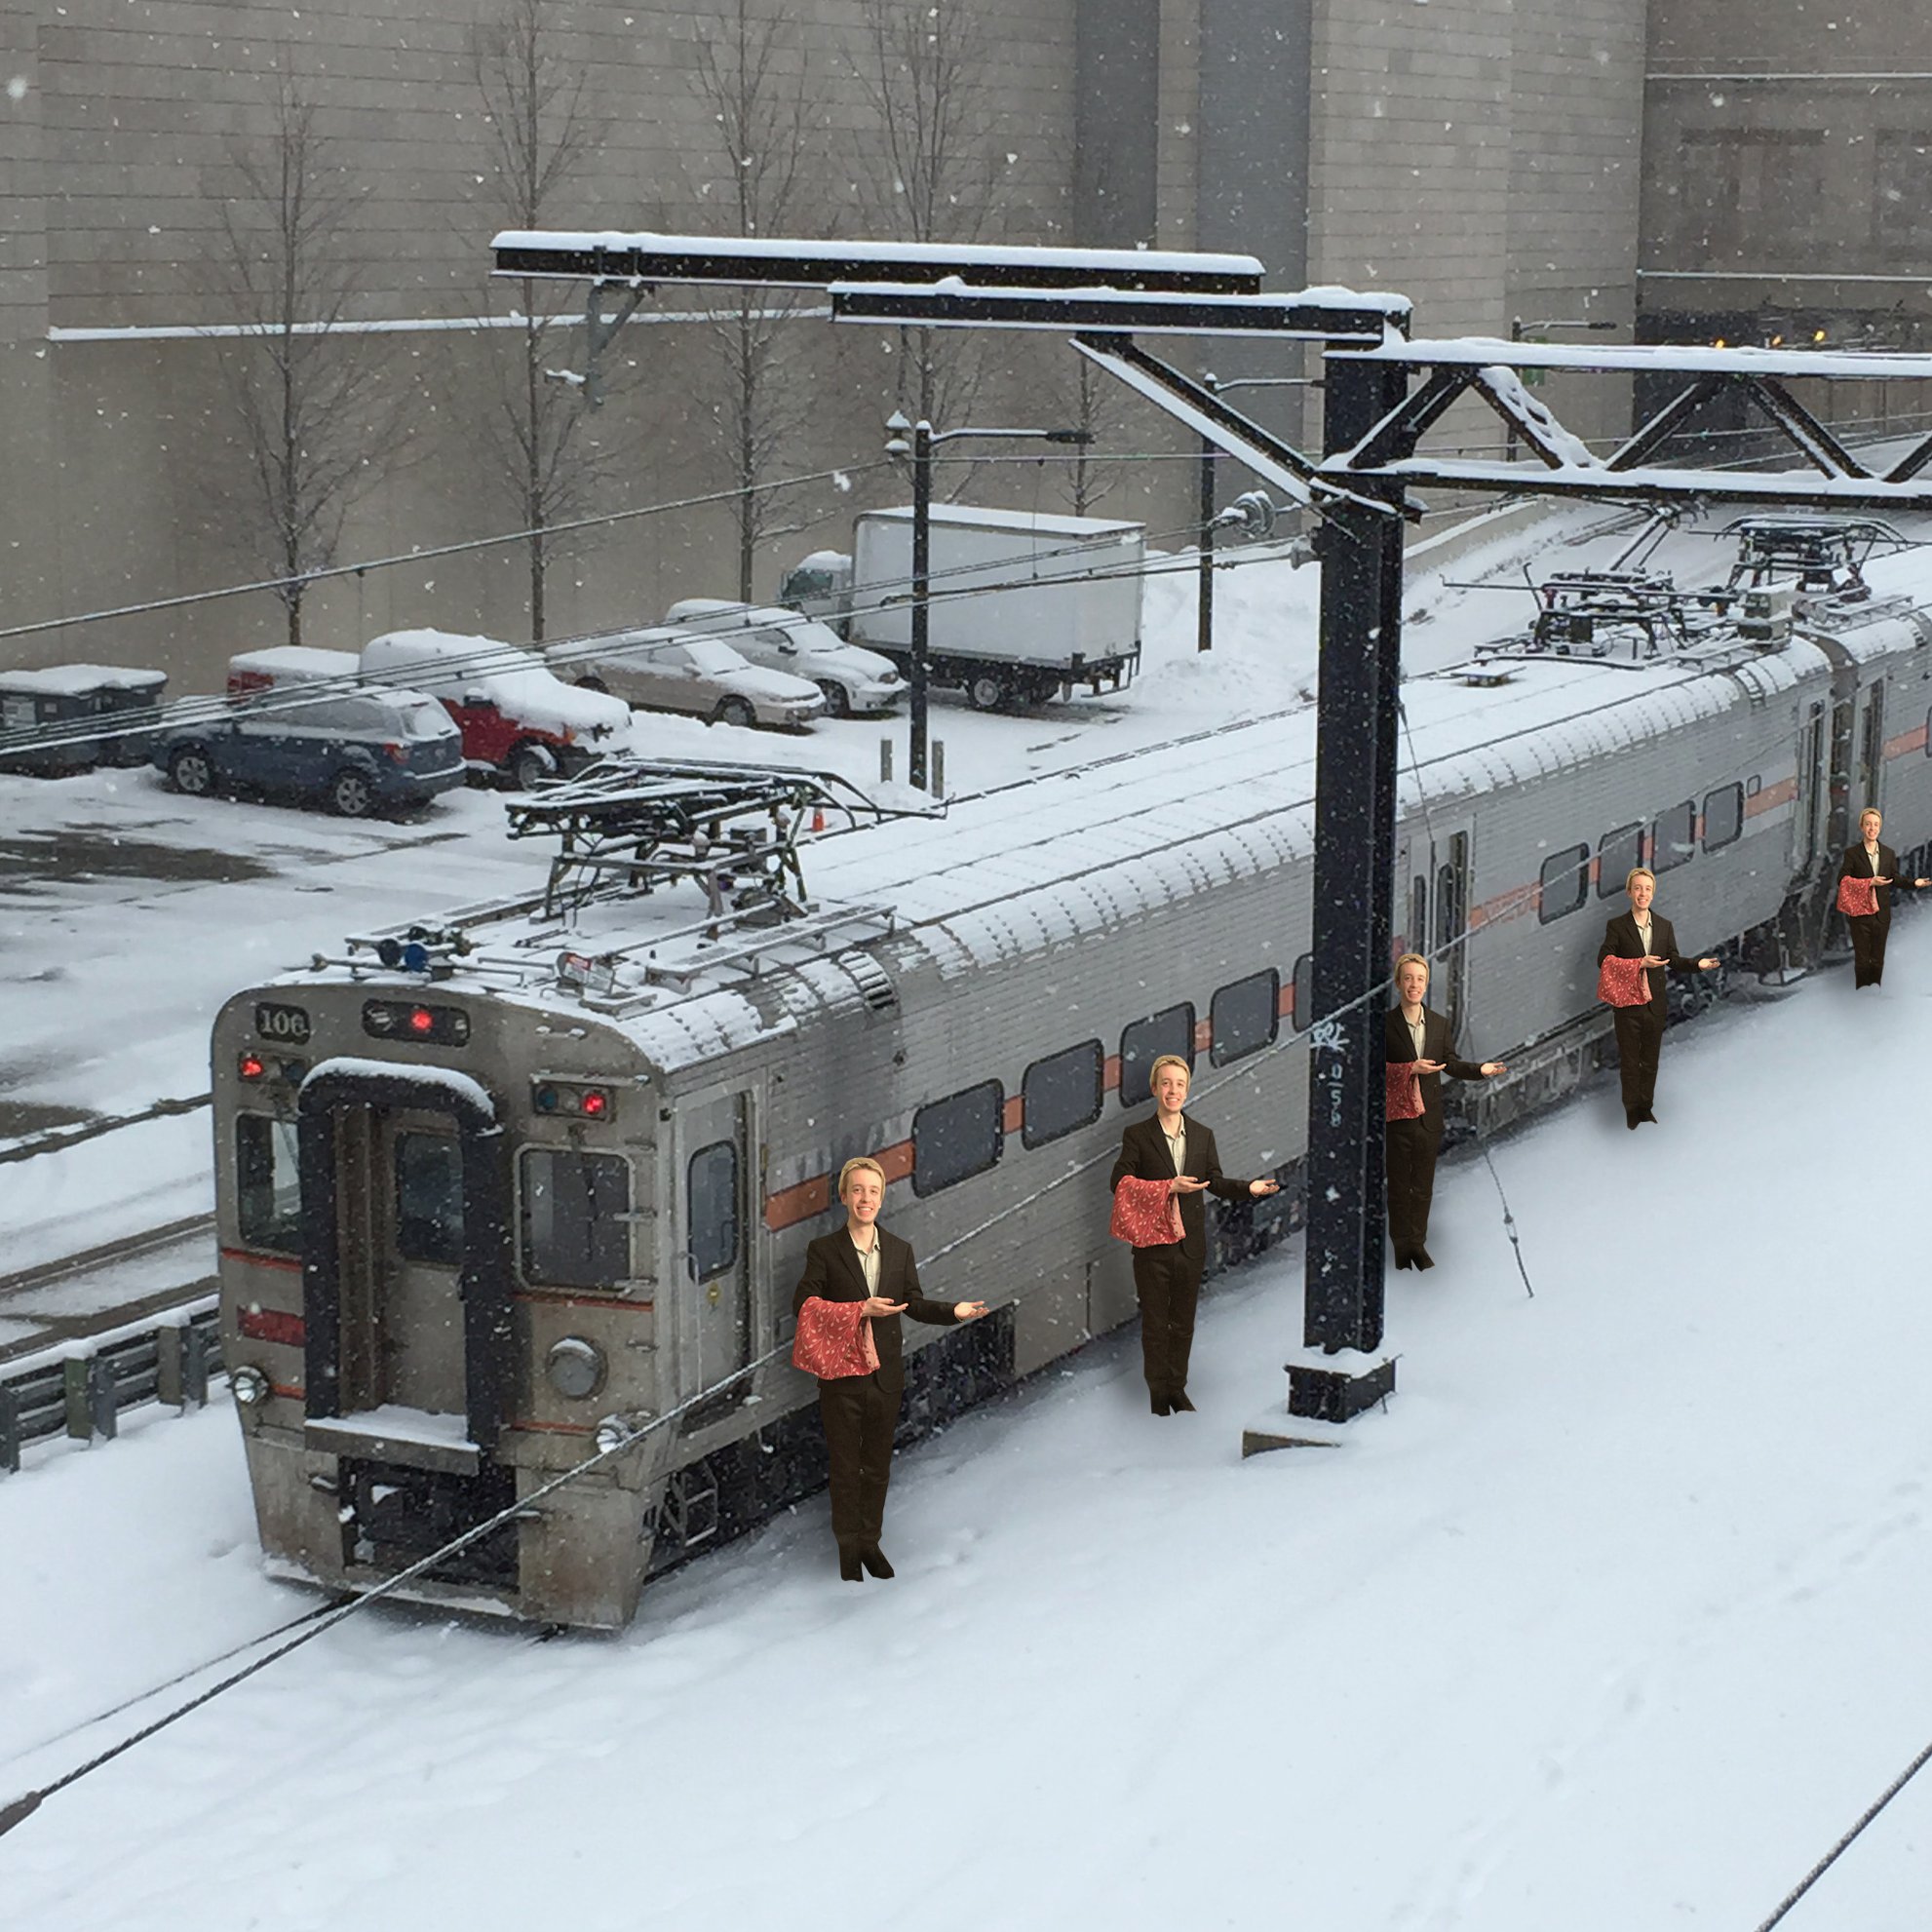 Six butler outside in the snow standing in front of a train in a snowy landscape